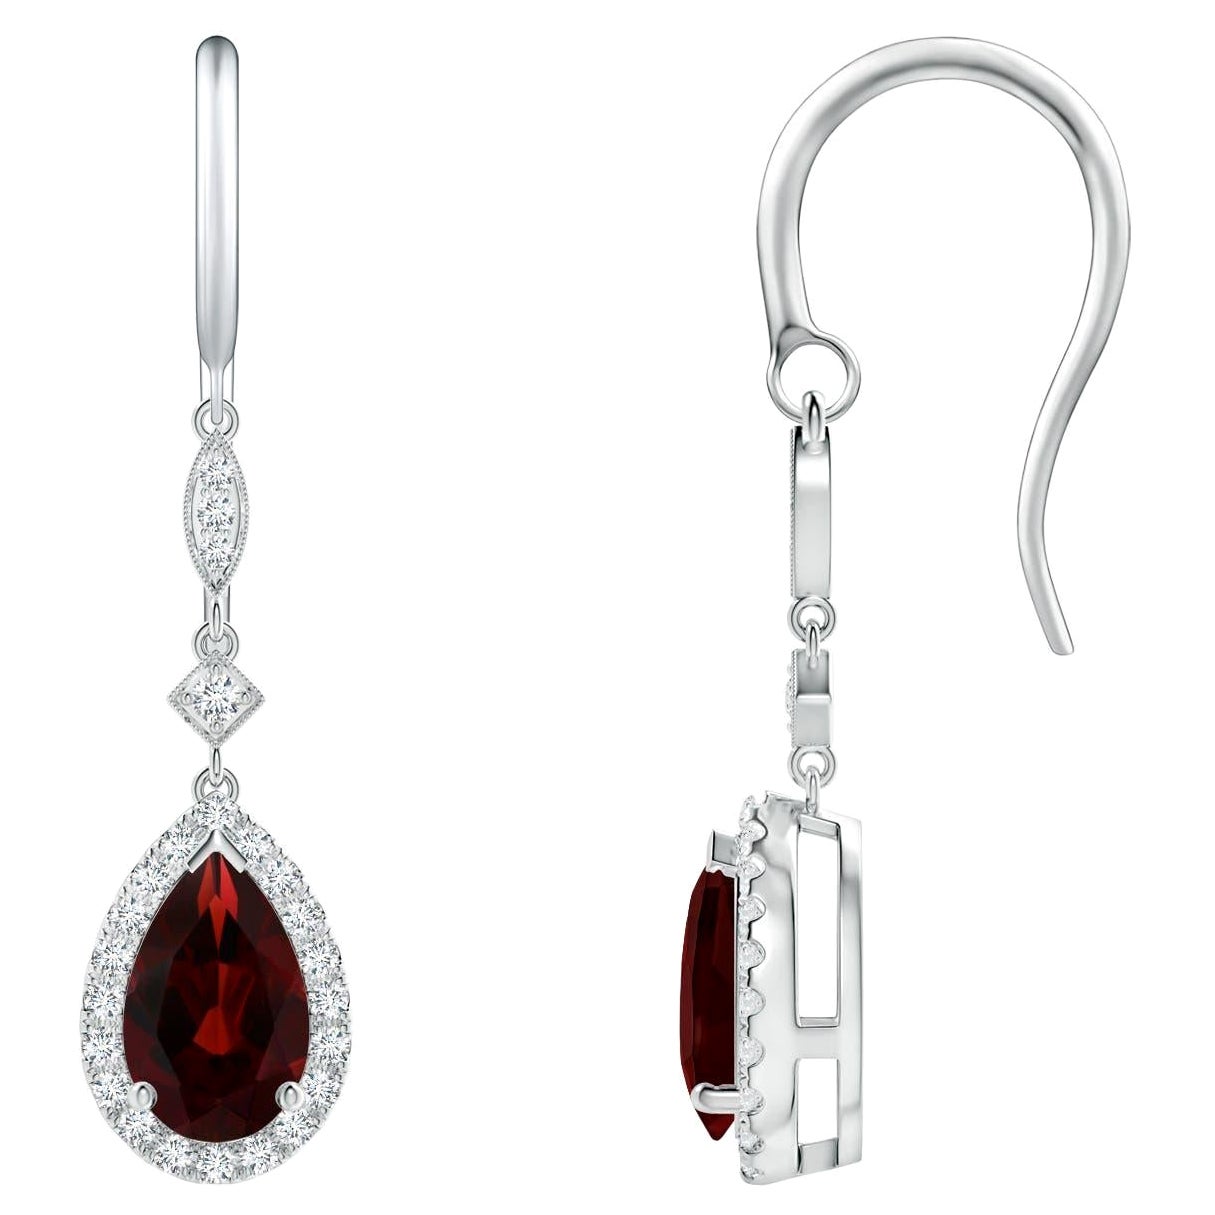 Natural Pear-Shaped 2.4ct Garnet Drop Earrings with Diamond in 14K White Gold For Sale